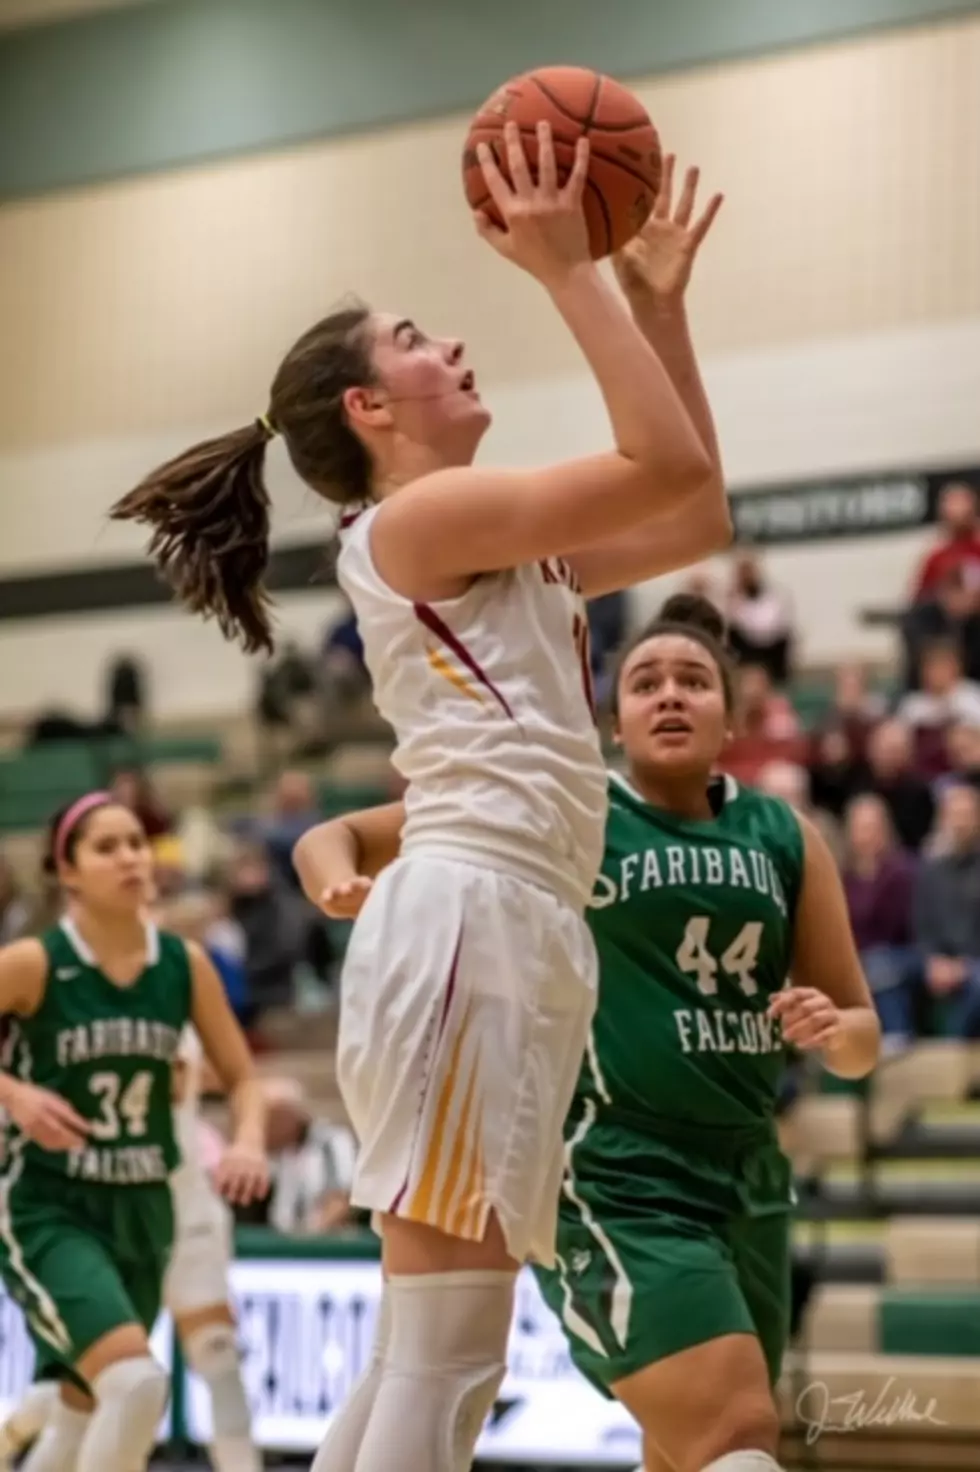 Northfield Sweeps Faribault in Two Close Basketball Games